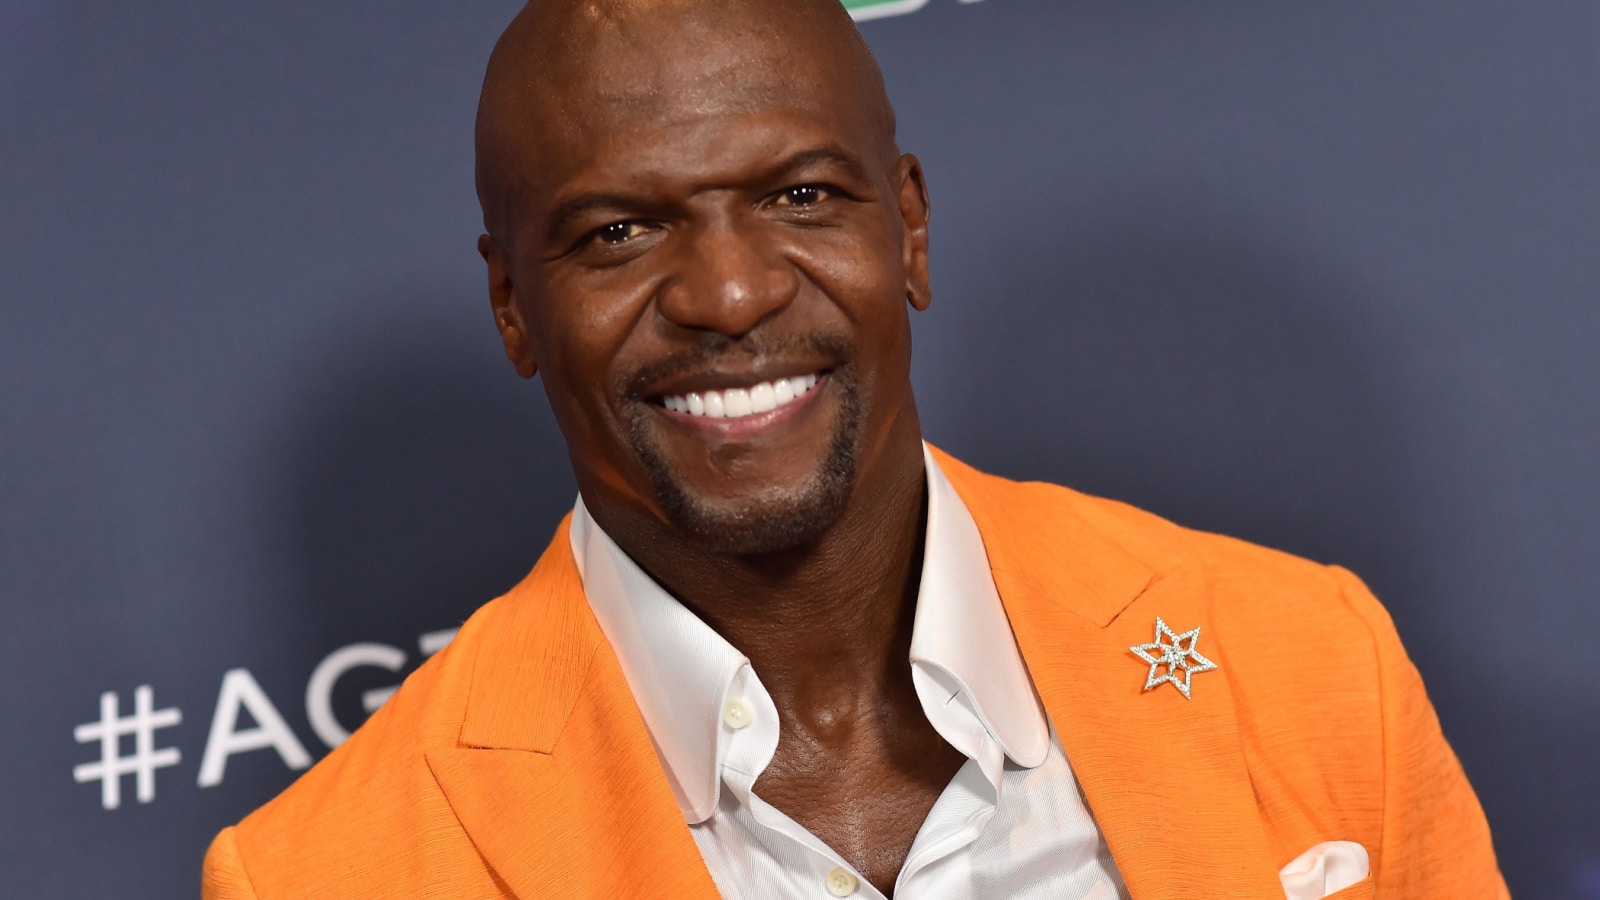 LOS ANGELES - SEP 03: Terry Crews arrives for 'America's Got Talent' Semi Finals on September 03, 2019 in Hollywood, CA